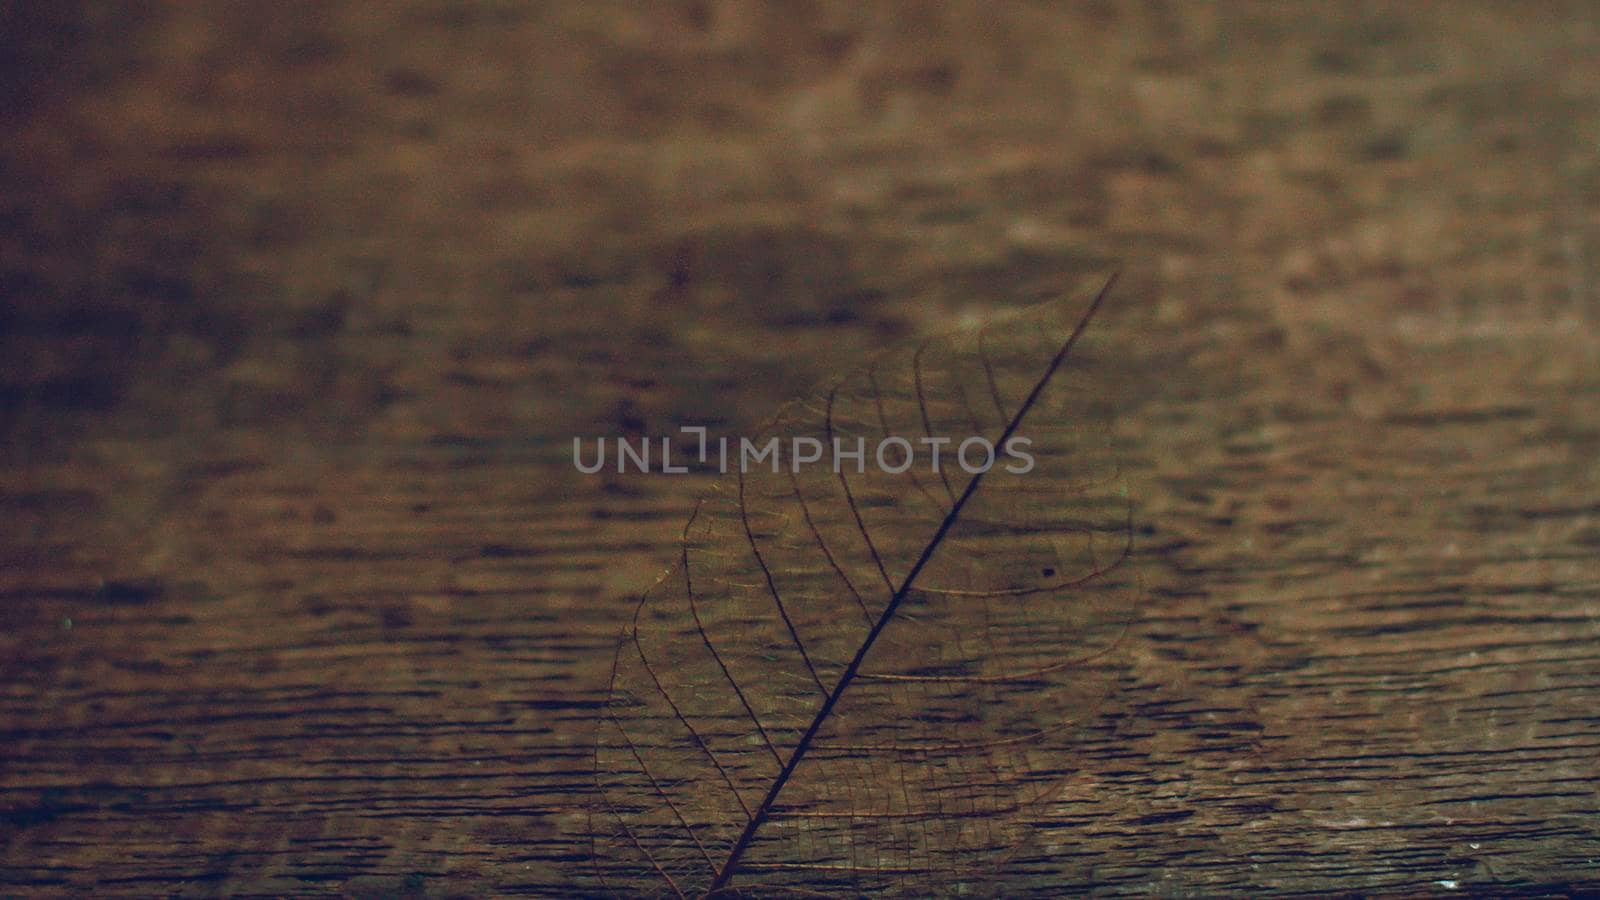 abstract transparenct leaf over wooden table background. nature concept idea by Petrichor